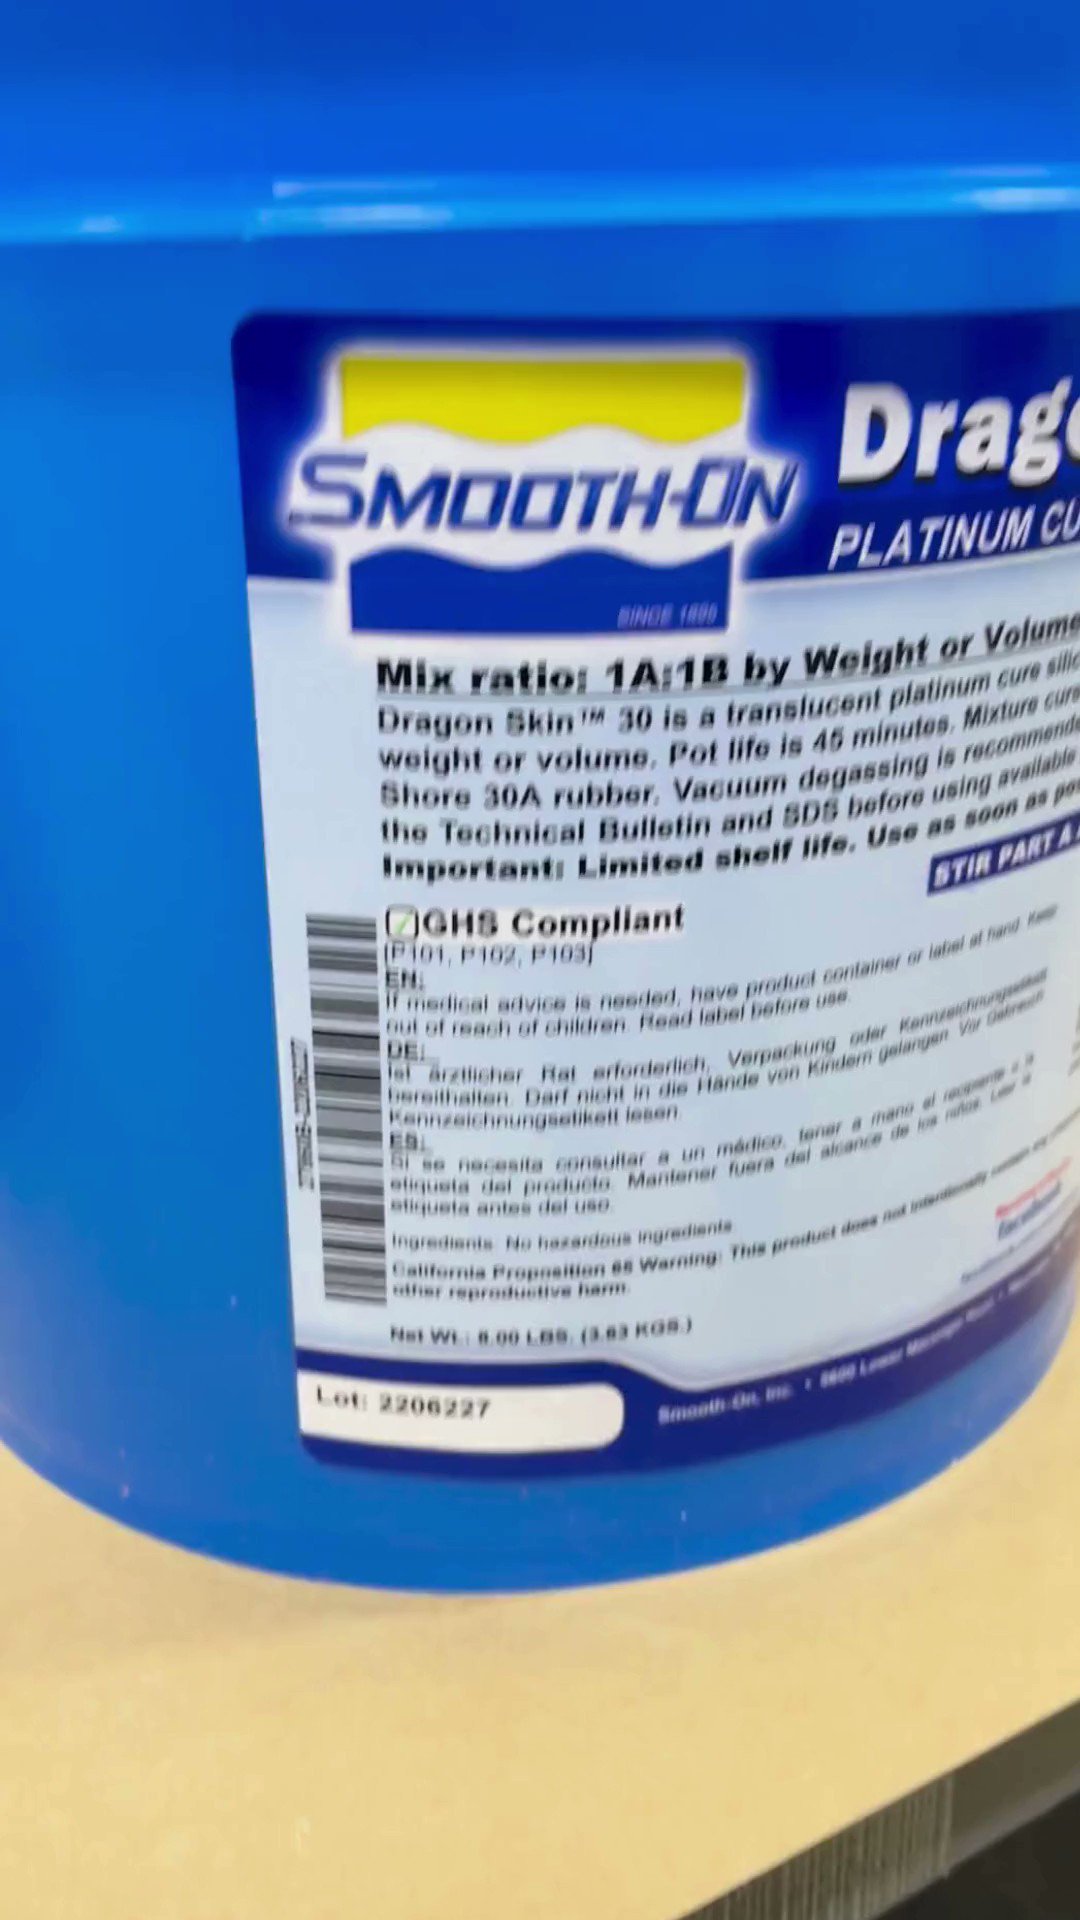 Smooth-On on X: Distributors mix and pour Dragon Skin™ 30 Platinum  silicone rubber part of day 4 of their after seminar distributor training!  #smoothon #smoothonproducts #moldmaking #silicone #siliconemoldmaking  #brushonmold #dragonskinsilicone https